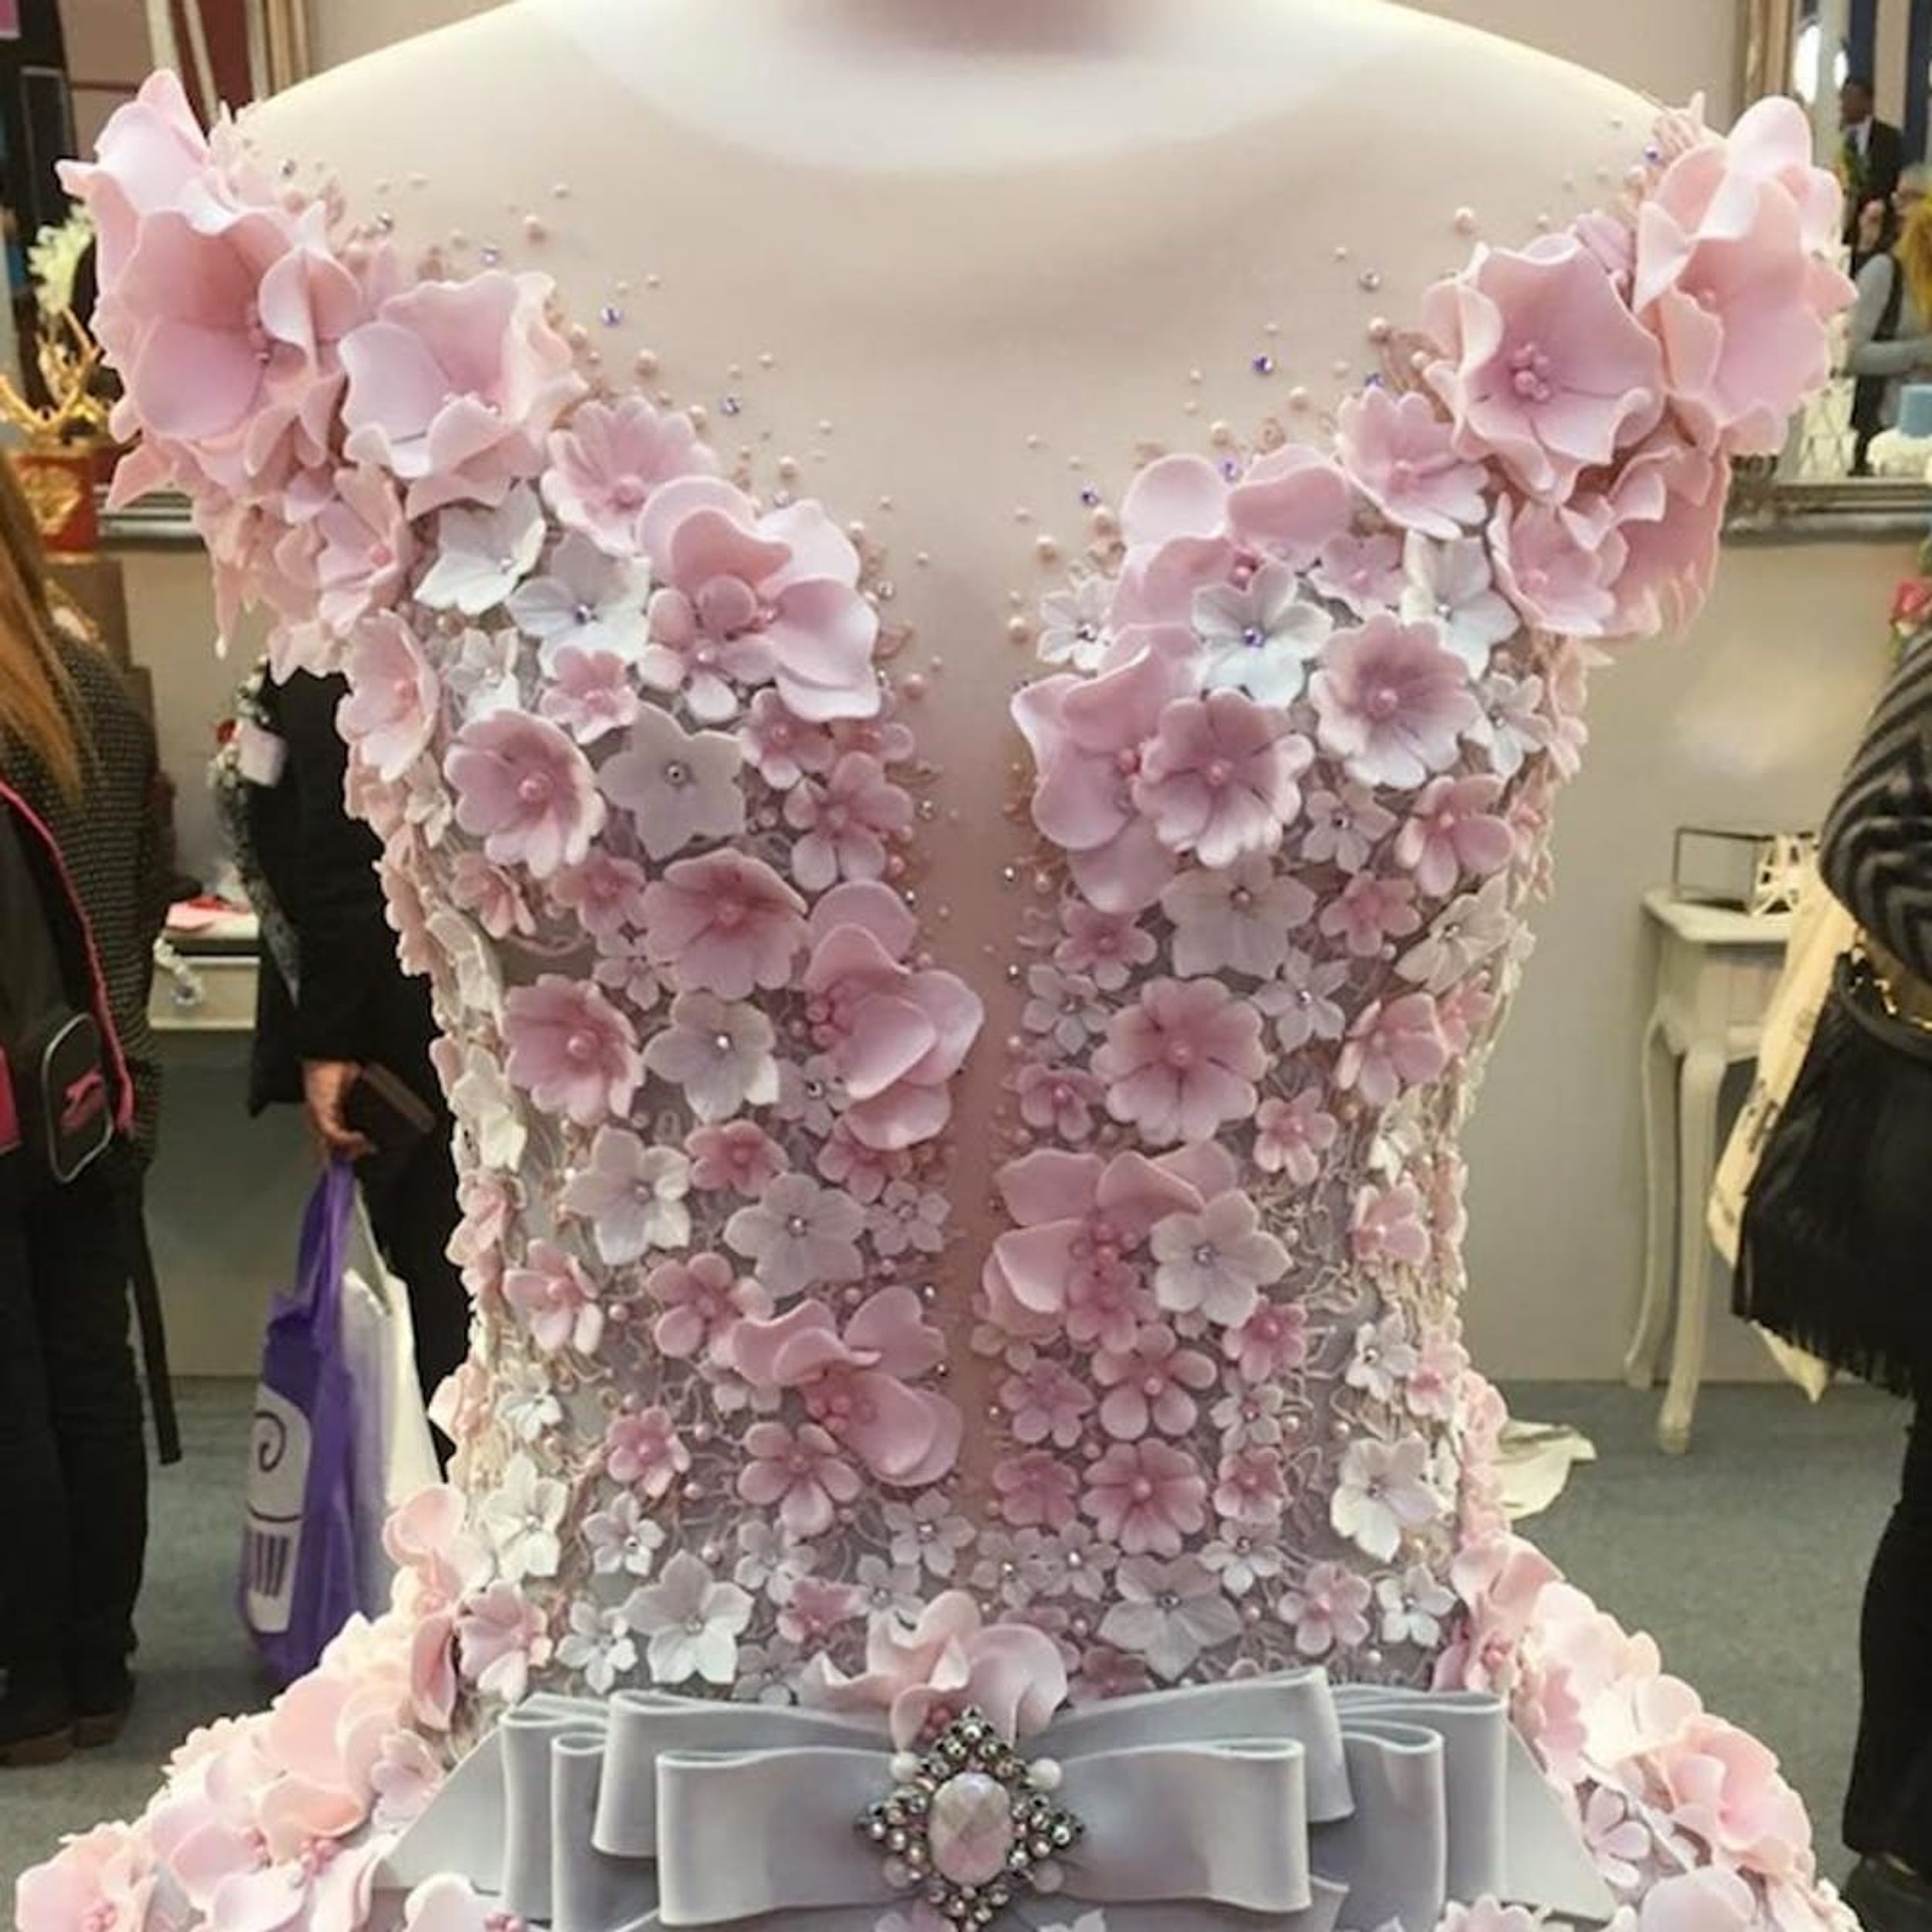 You Won’t Believe What Tasty Treat This Dress Is Made Out Of